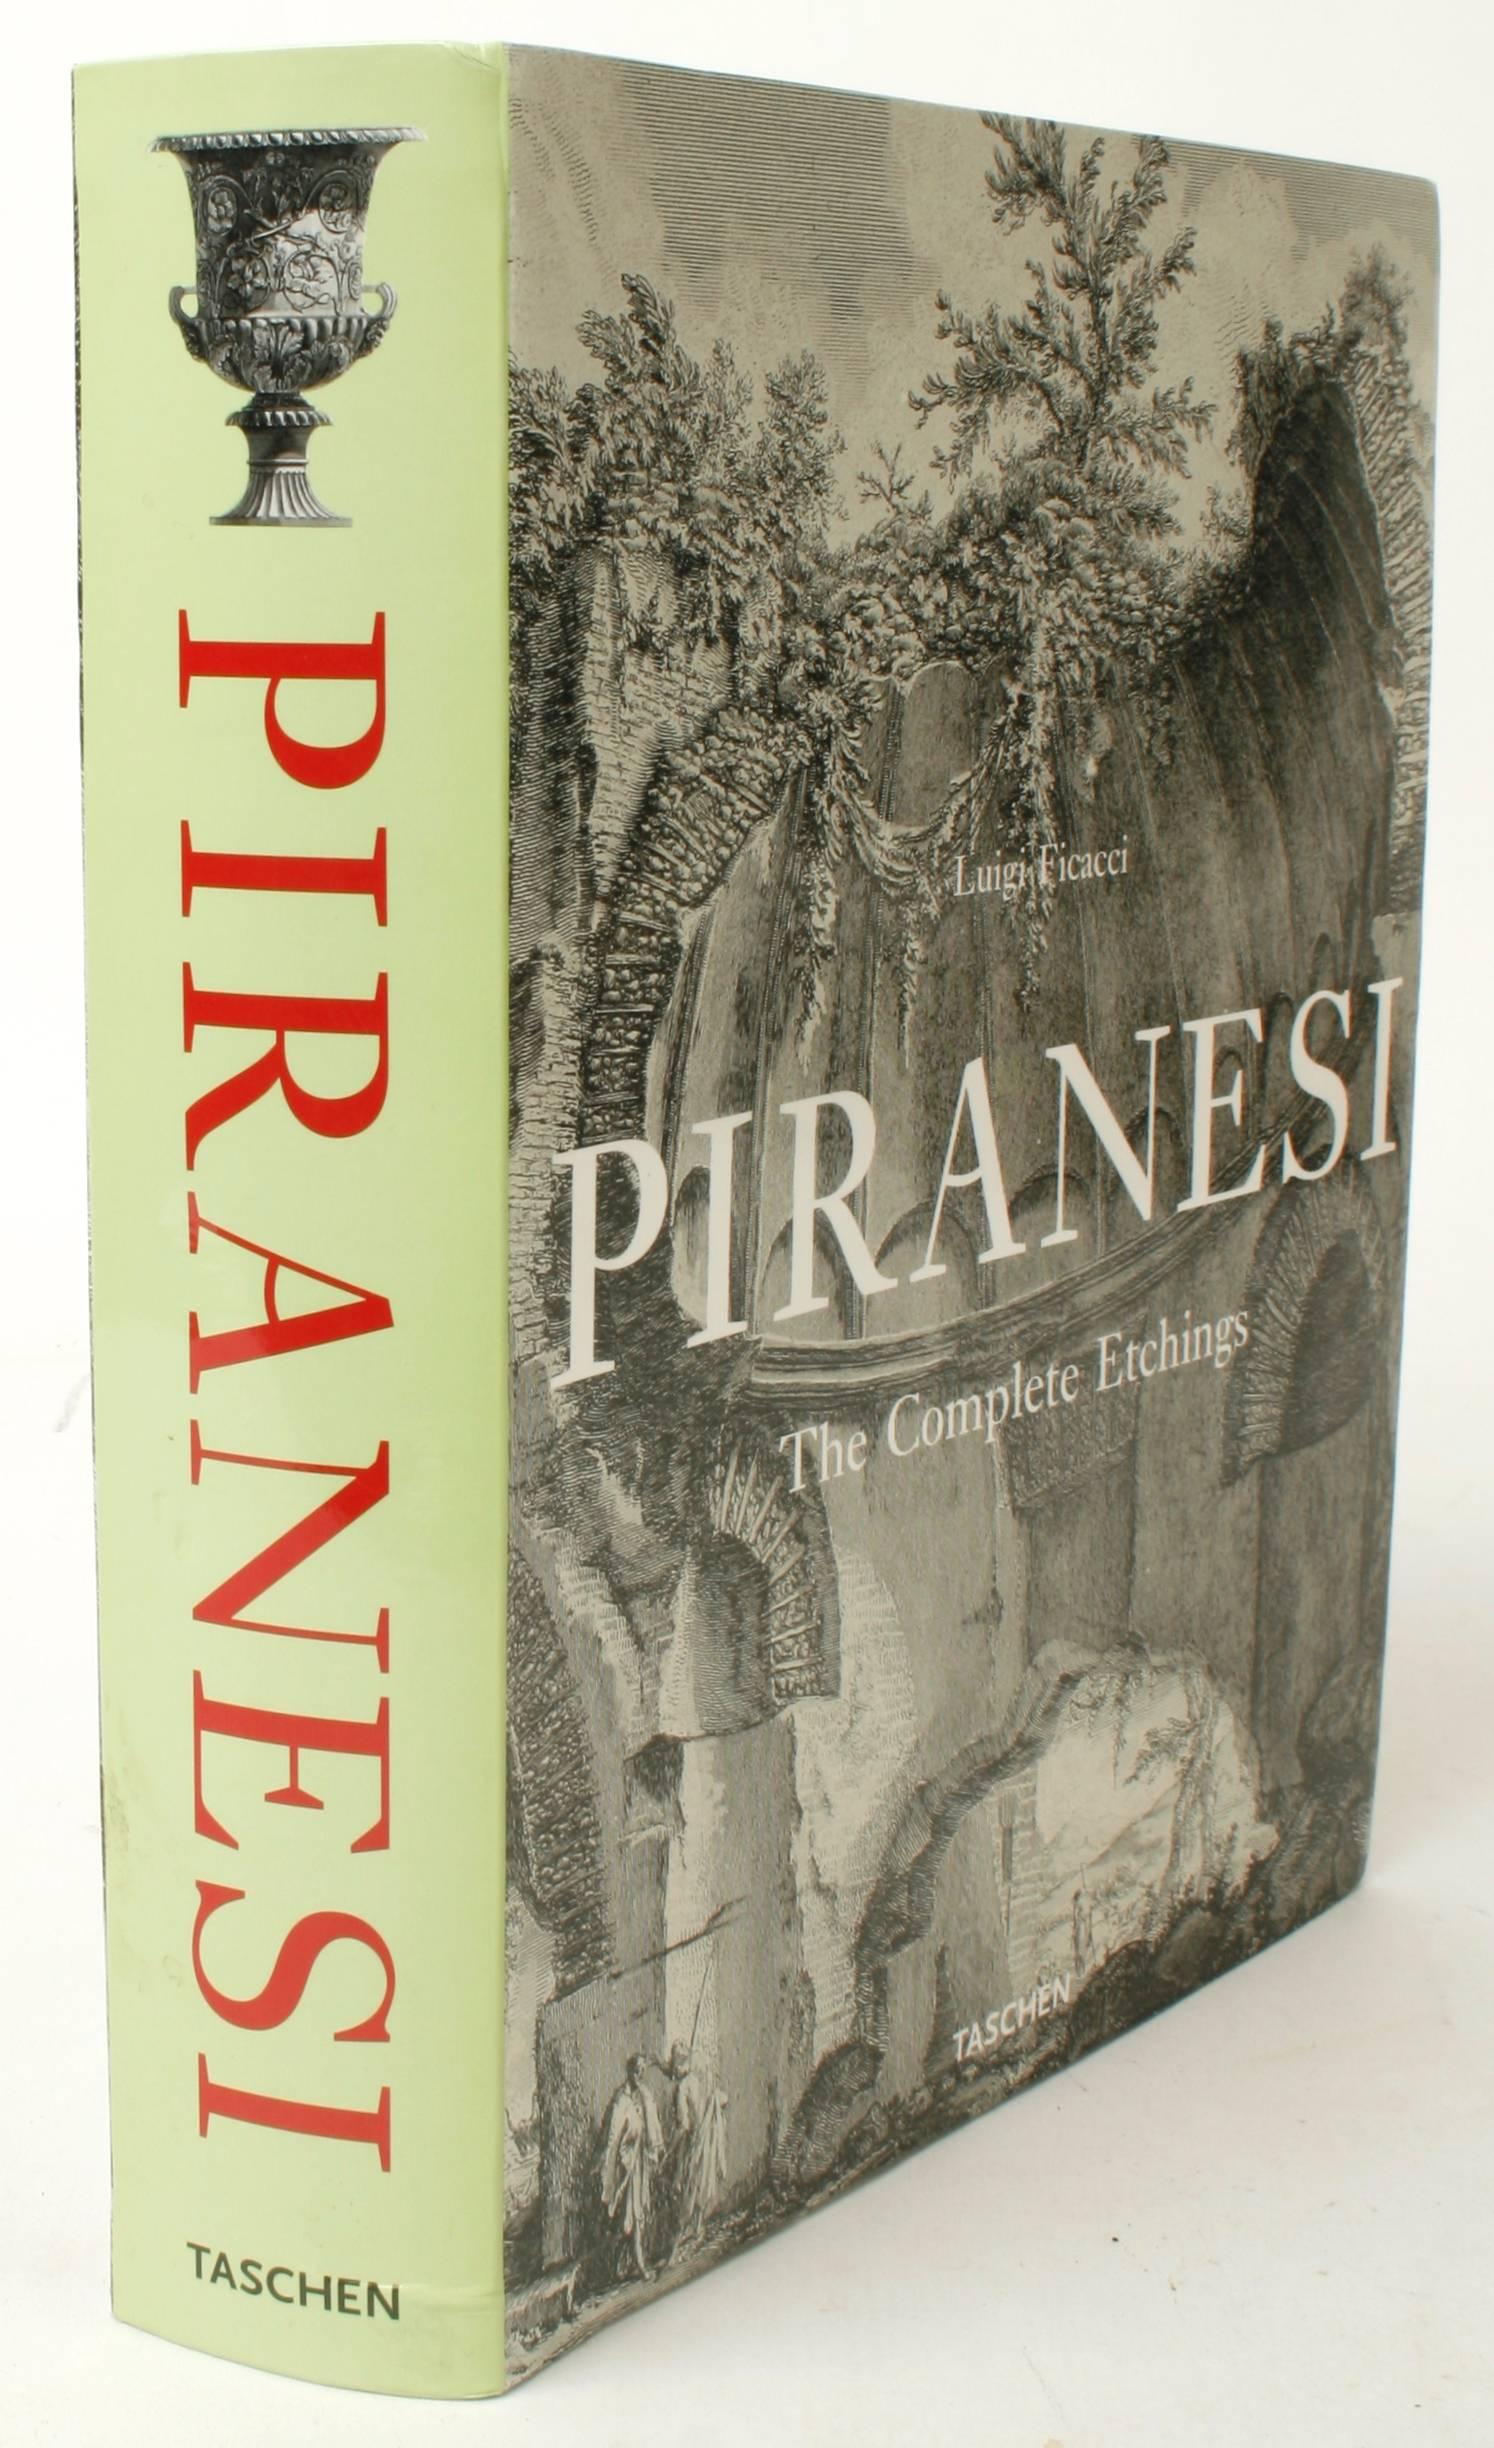 Piranesi, The complete etching by Giovanni Battista. Köln: Taschen, 2000. First edition paper back. 799 pp. A portfolio of the complete etching of Giovanni Battista Piranesi. Piranesi was an Italian artist famous for his etchings of Rome and